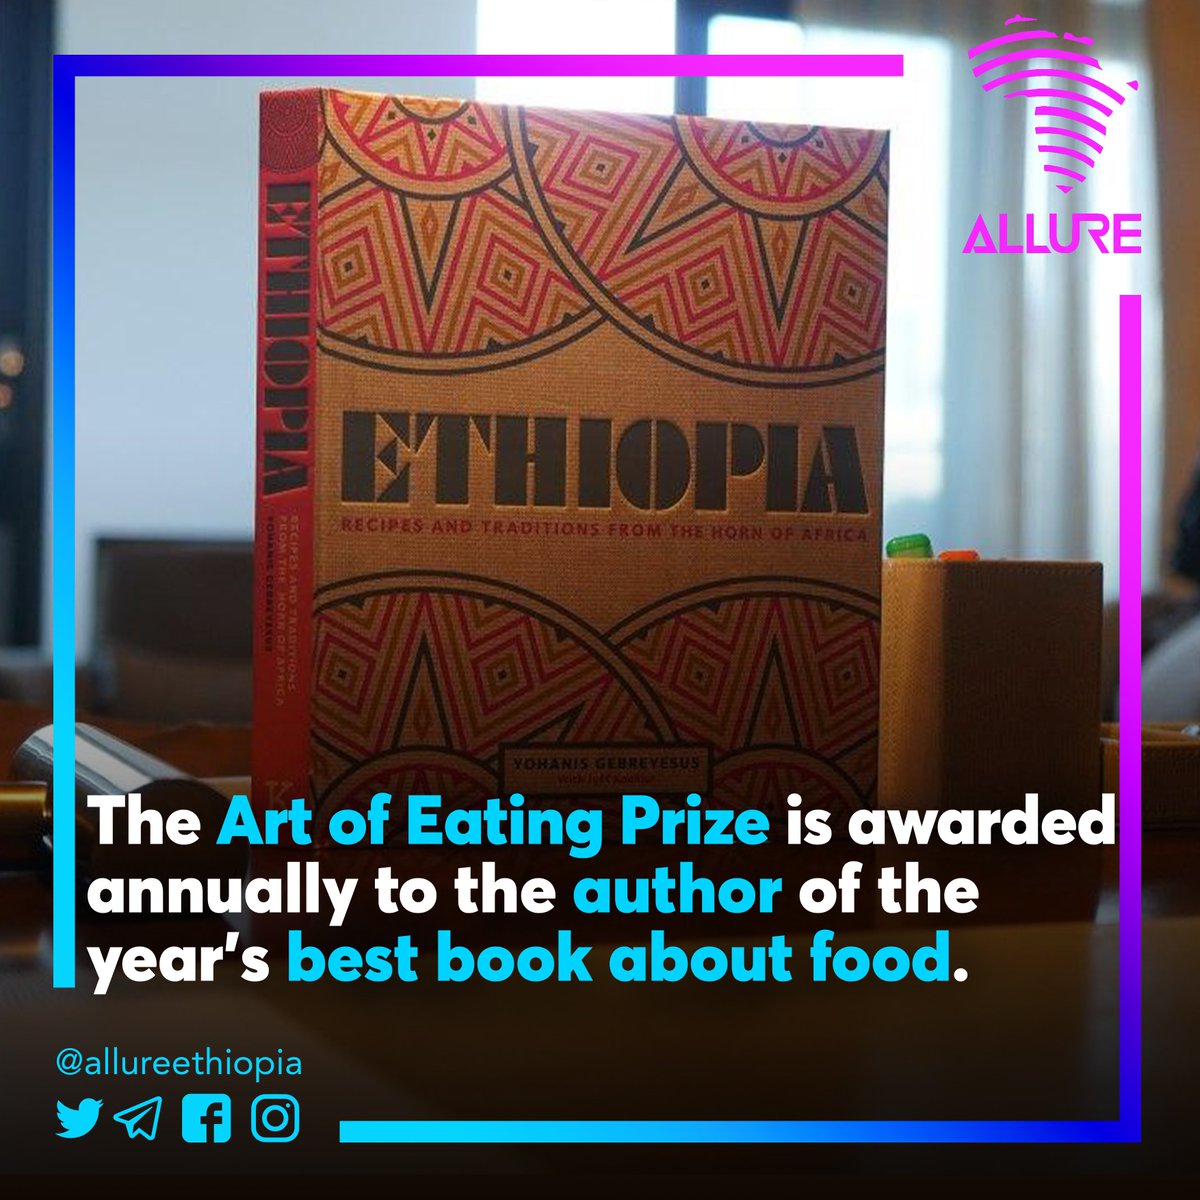 Author & TV Personality Chef Yohanis’ cookbook, has been longlisted for the 2020 #ArtofEatingPrize.
The #cookbook highlights all the authentic dishes of #Ethiopia while telling wondrous stories of local communities. #Food